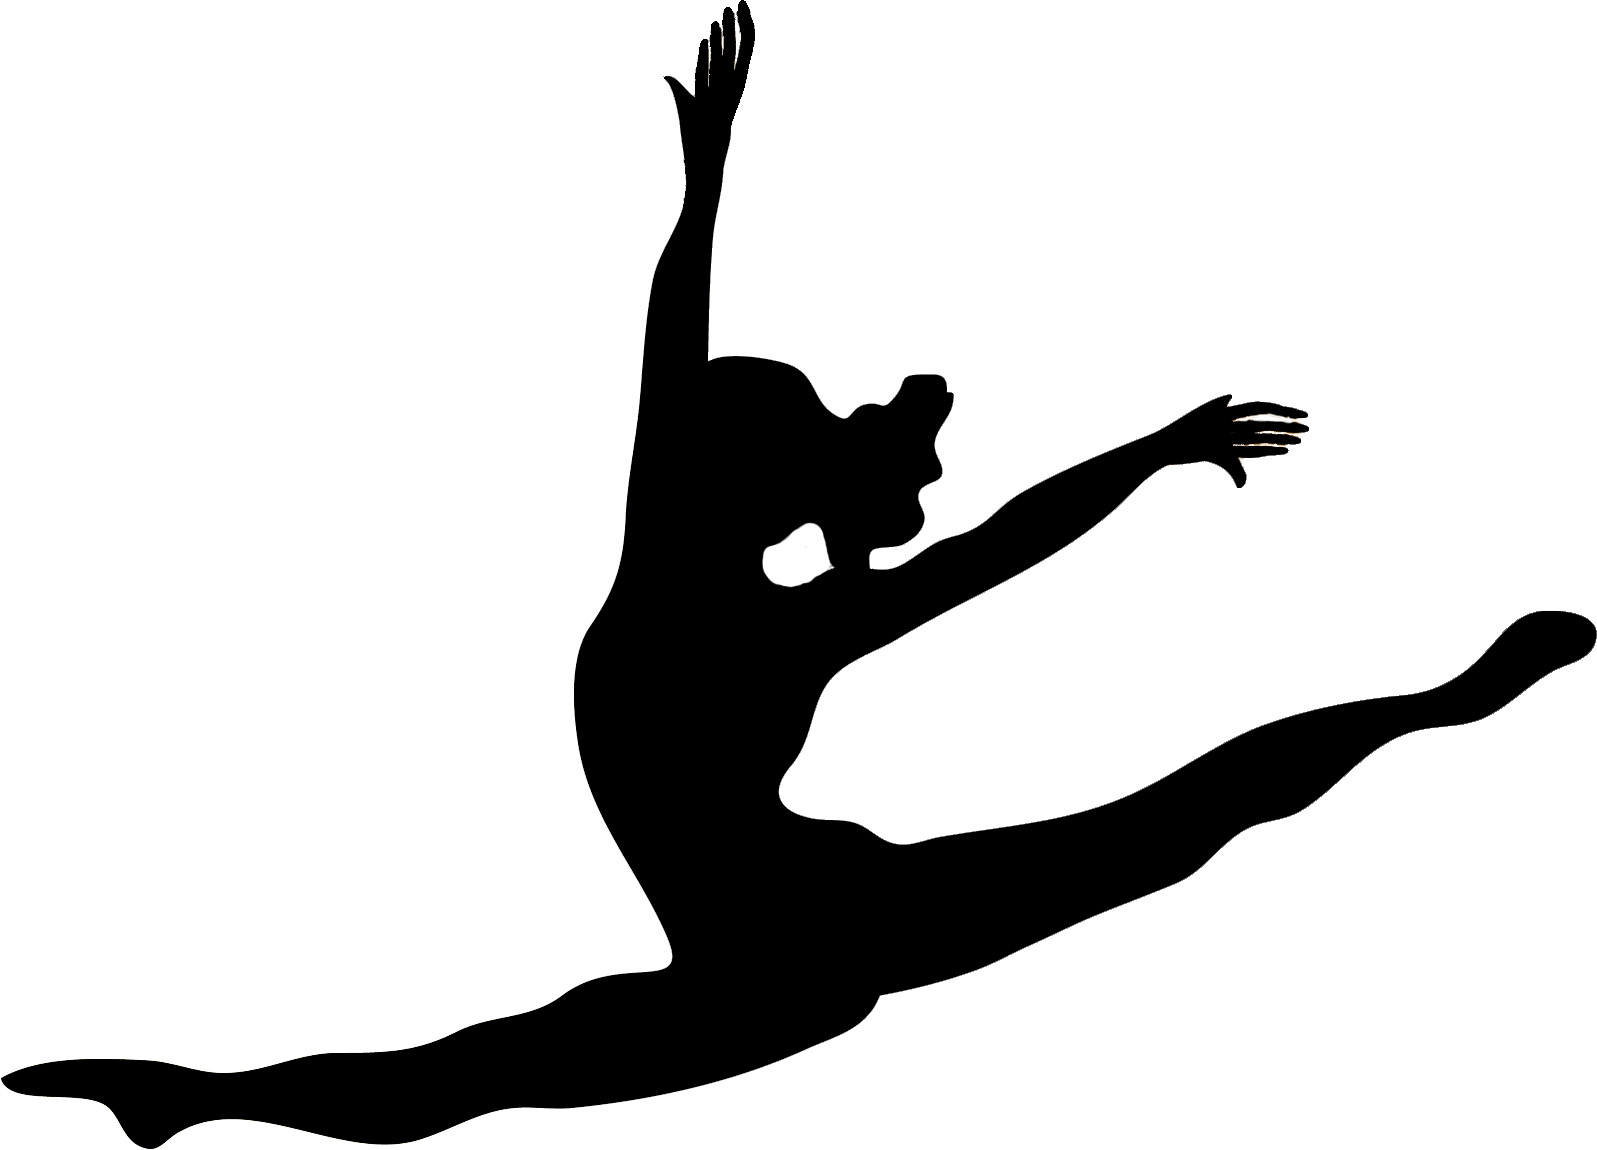 Images For > Modern Dance Silhouettes Clip Art.